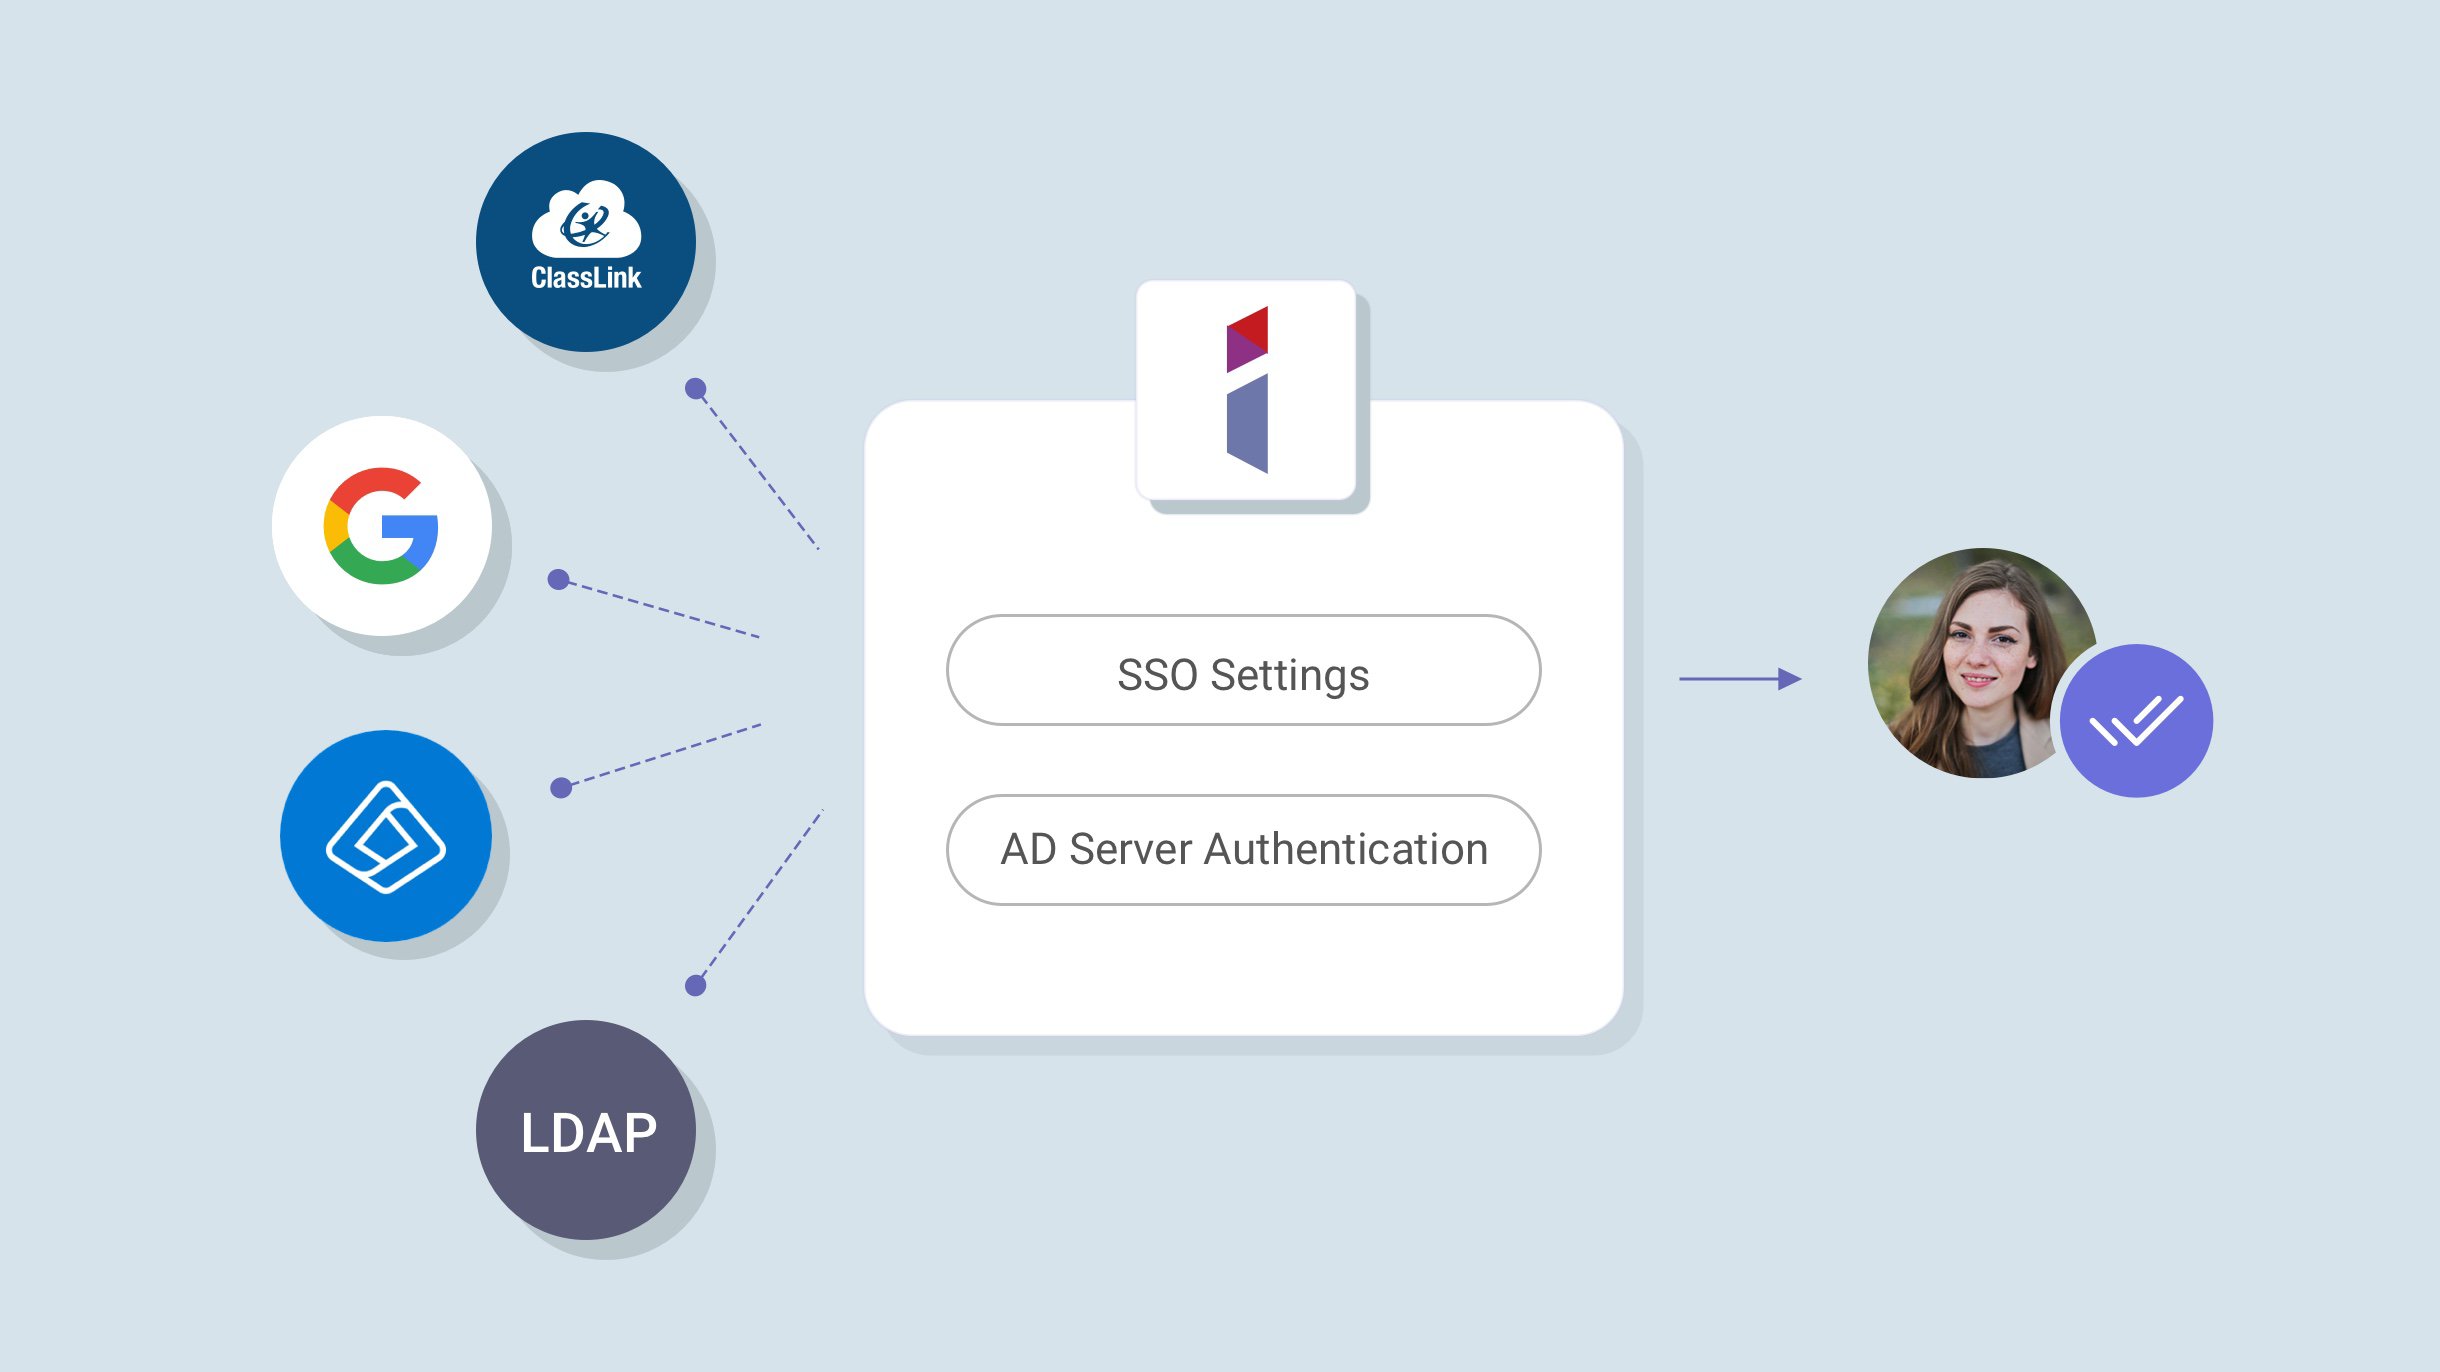 BenQ IAM Identity and Access Management usage benefit chart with Google, Azure, and LDAP integration